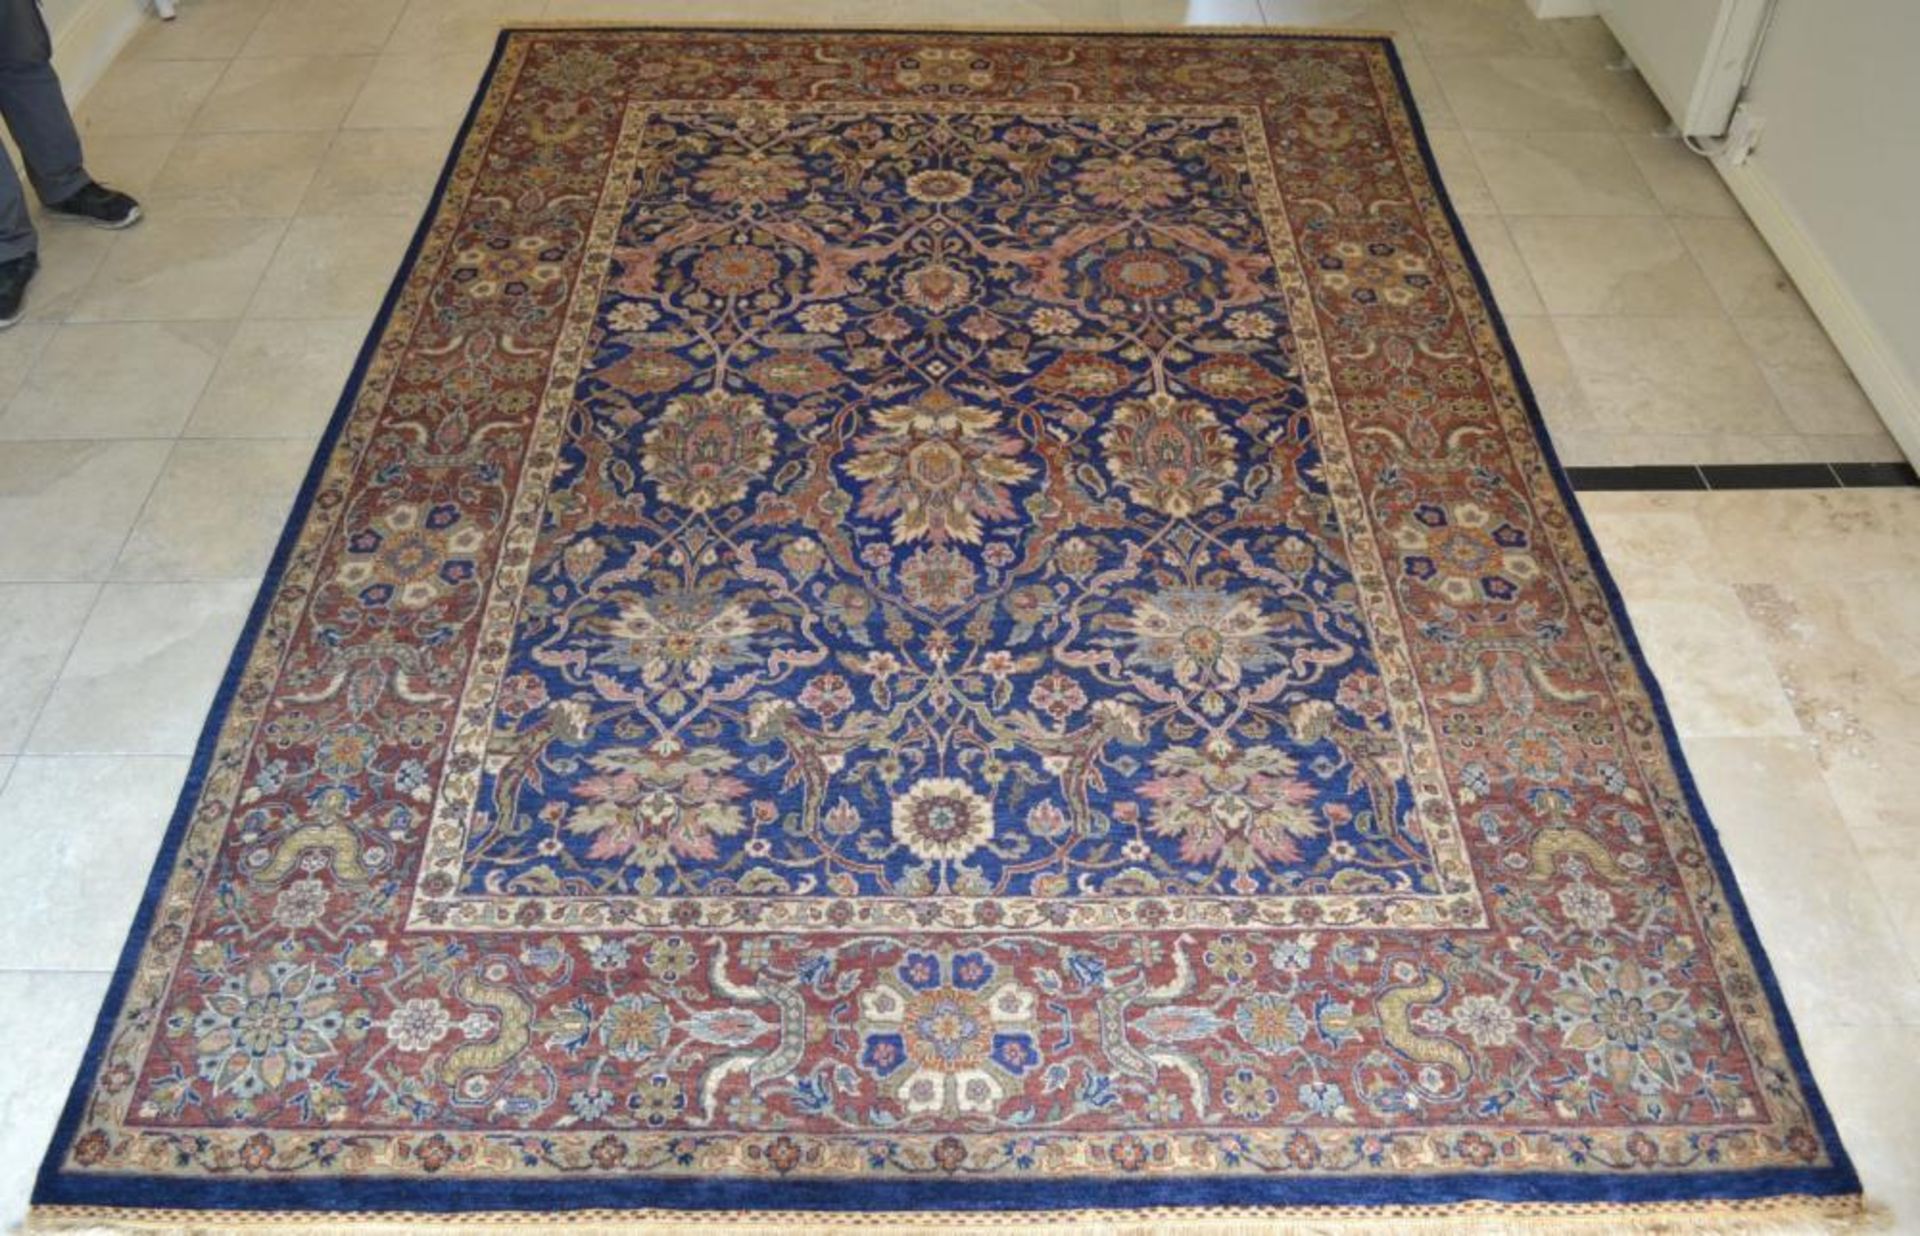 1 x Fine Indian Vegetable Dyed Handmade Carpet in Navy and Rust - All Wool With Cotton Foundation - - Image 20 of 22